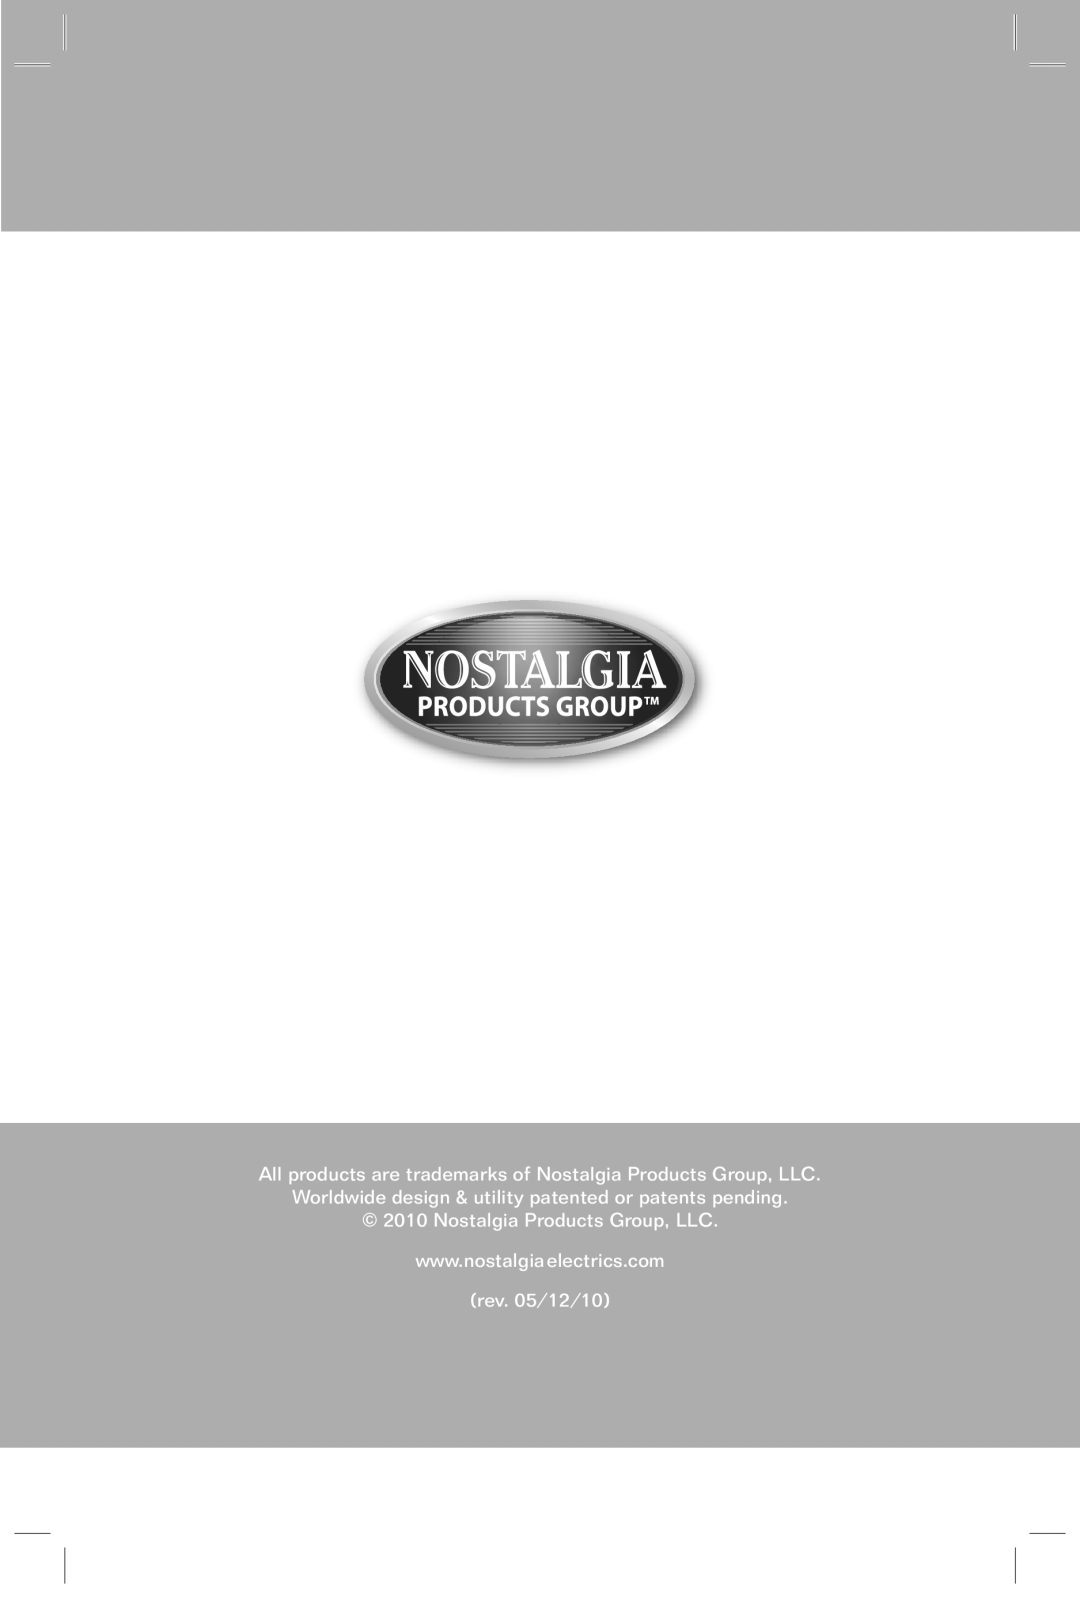 Nostalgia Electrics KRS-2150 manual All products are trademarks of Nostalgia Products Group, LLC, rev. 05/12/10 